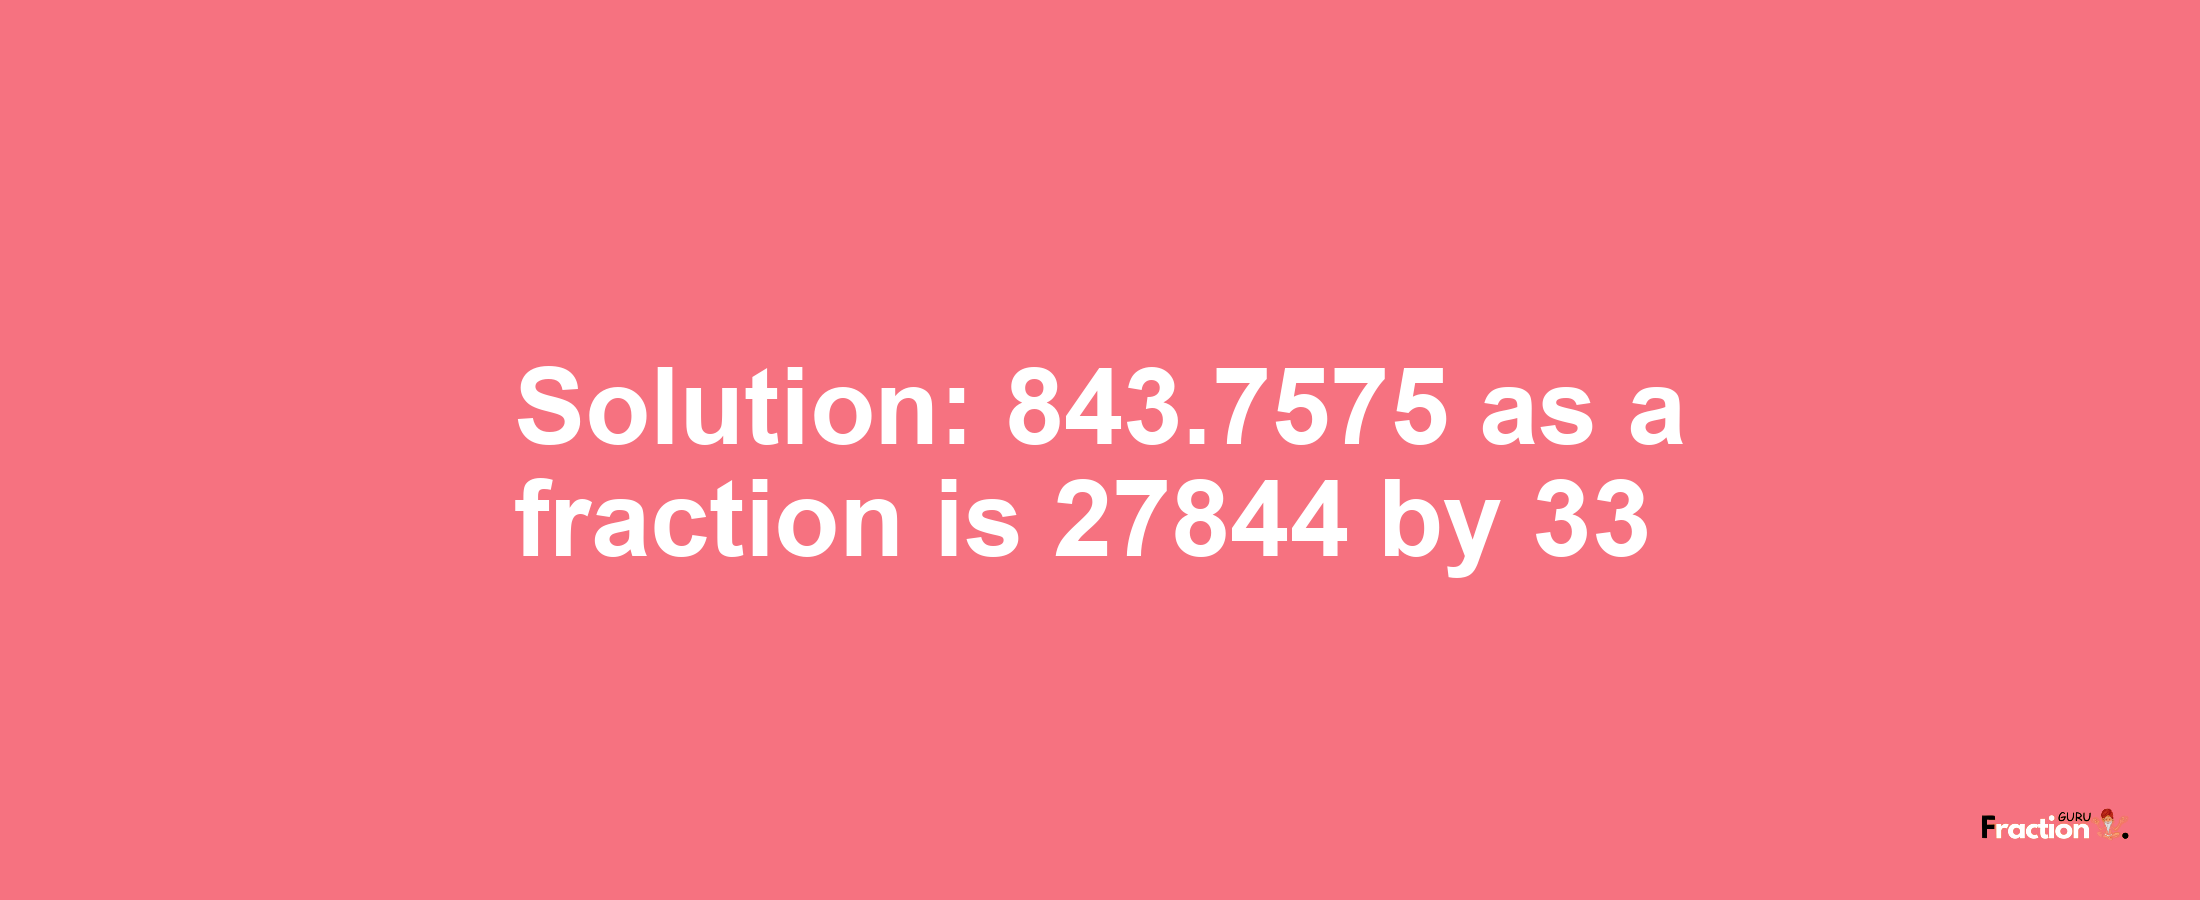 Solution:843.7575 as a fraction is 27844/33